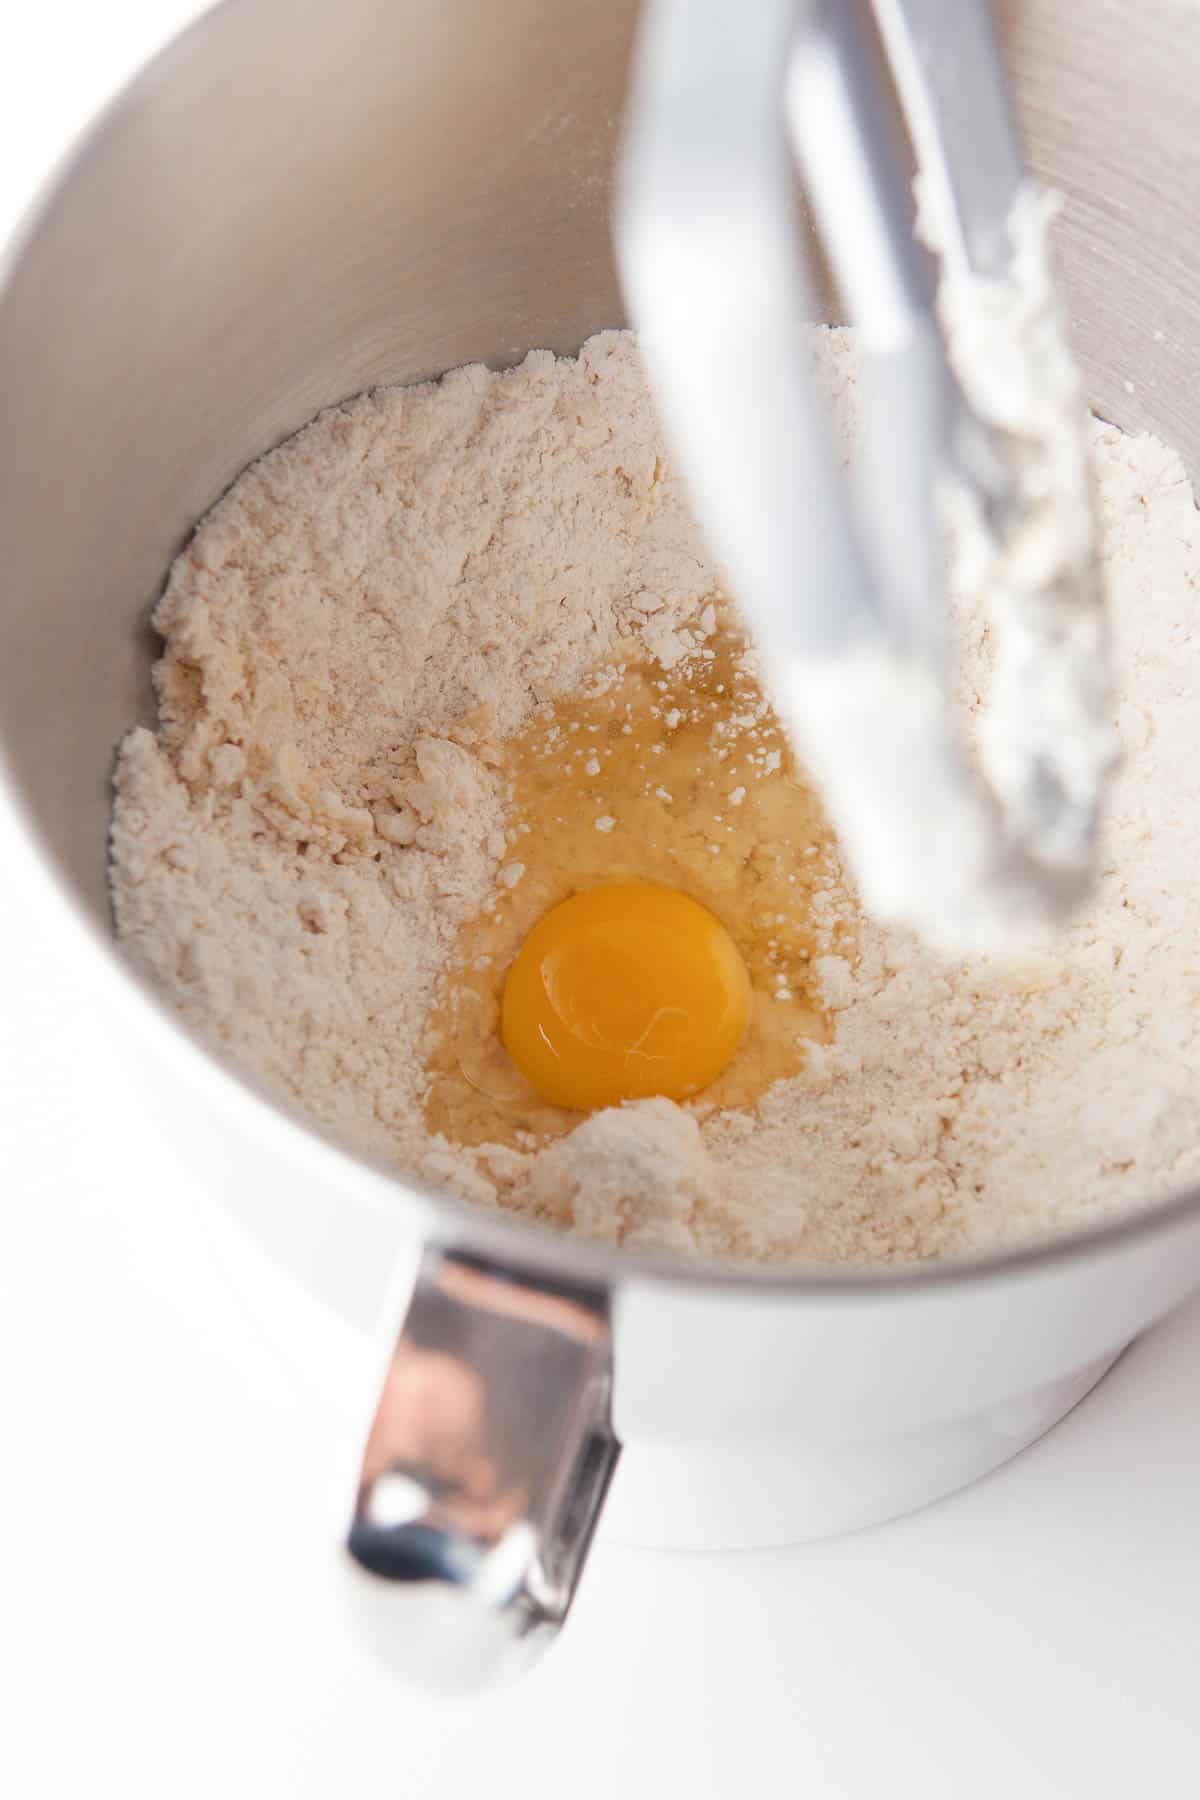 An egg is being added to flour in a mixing bowl to make dulce de leche cookies.